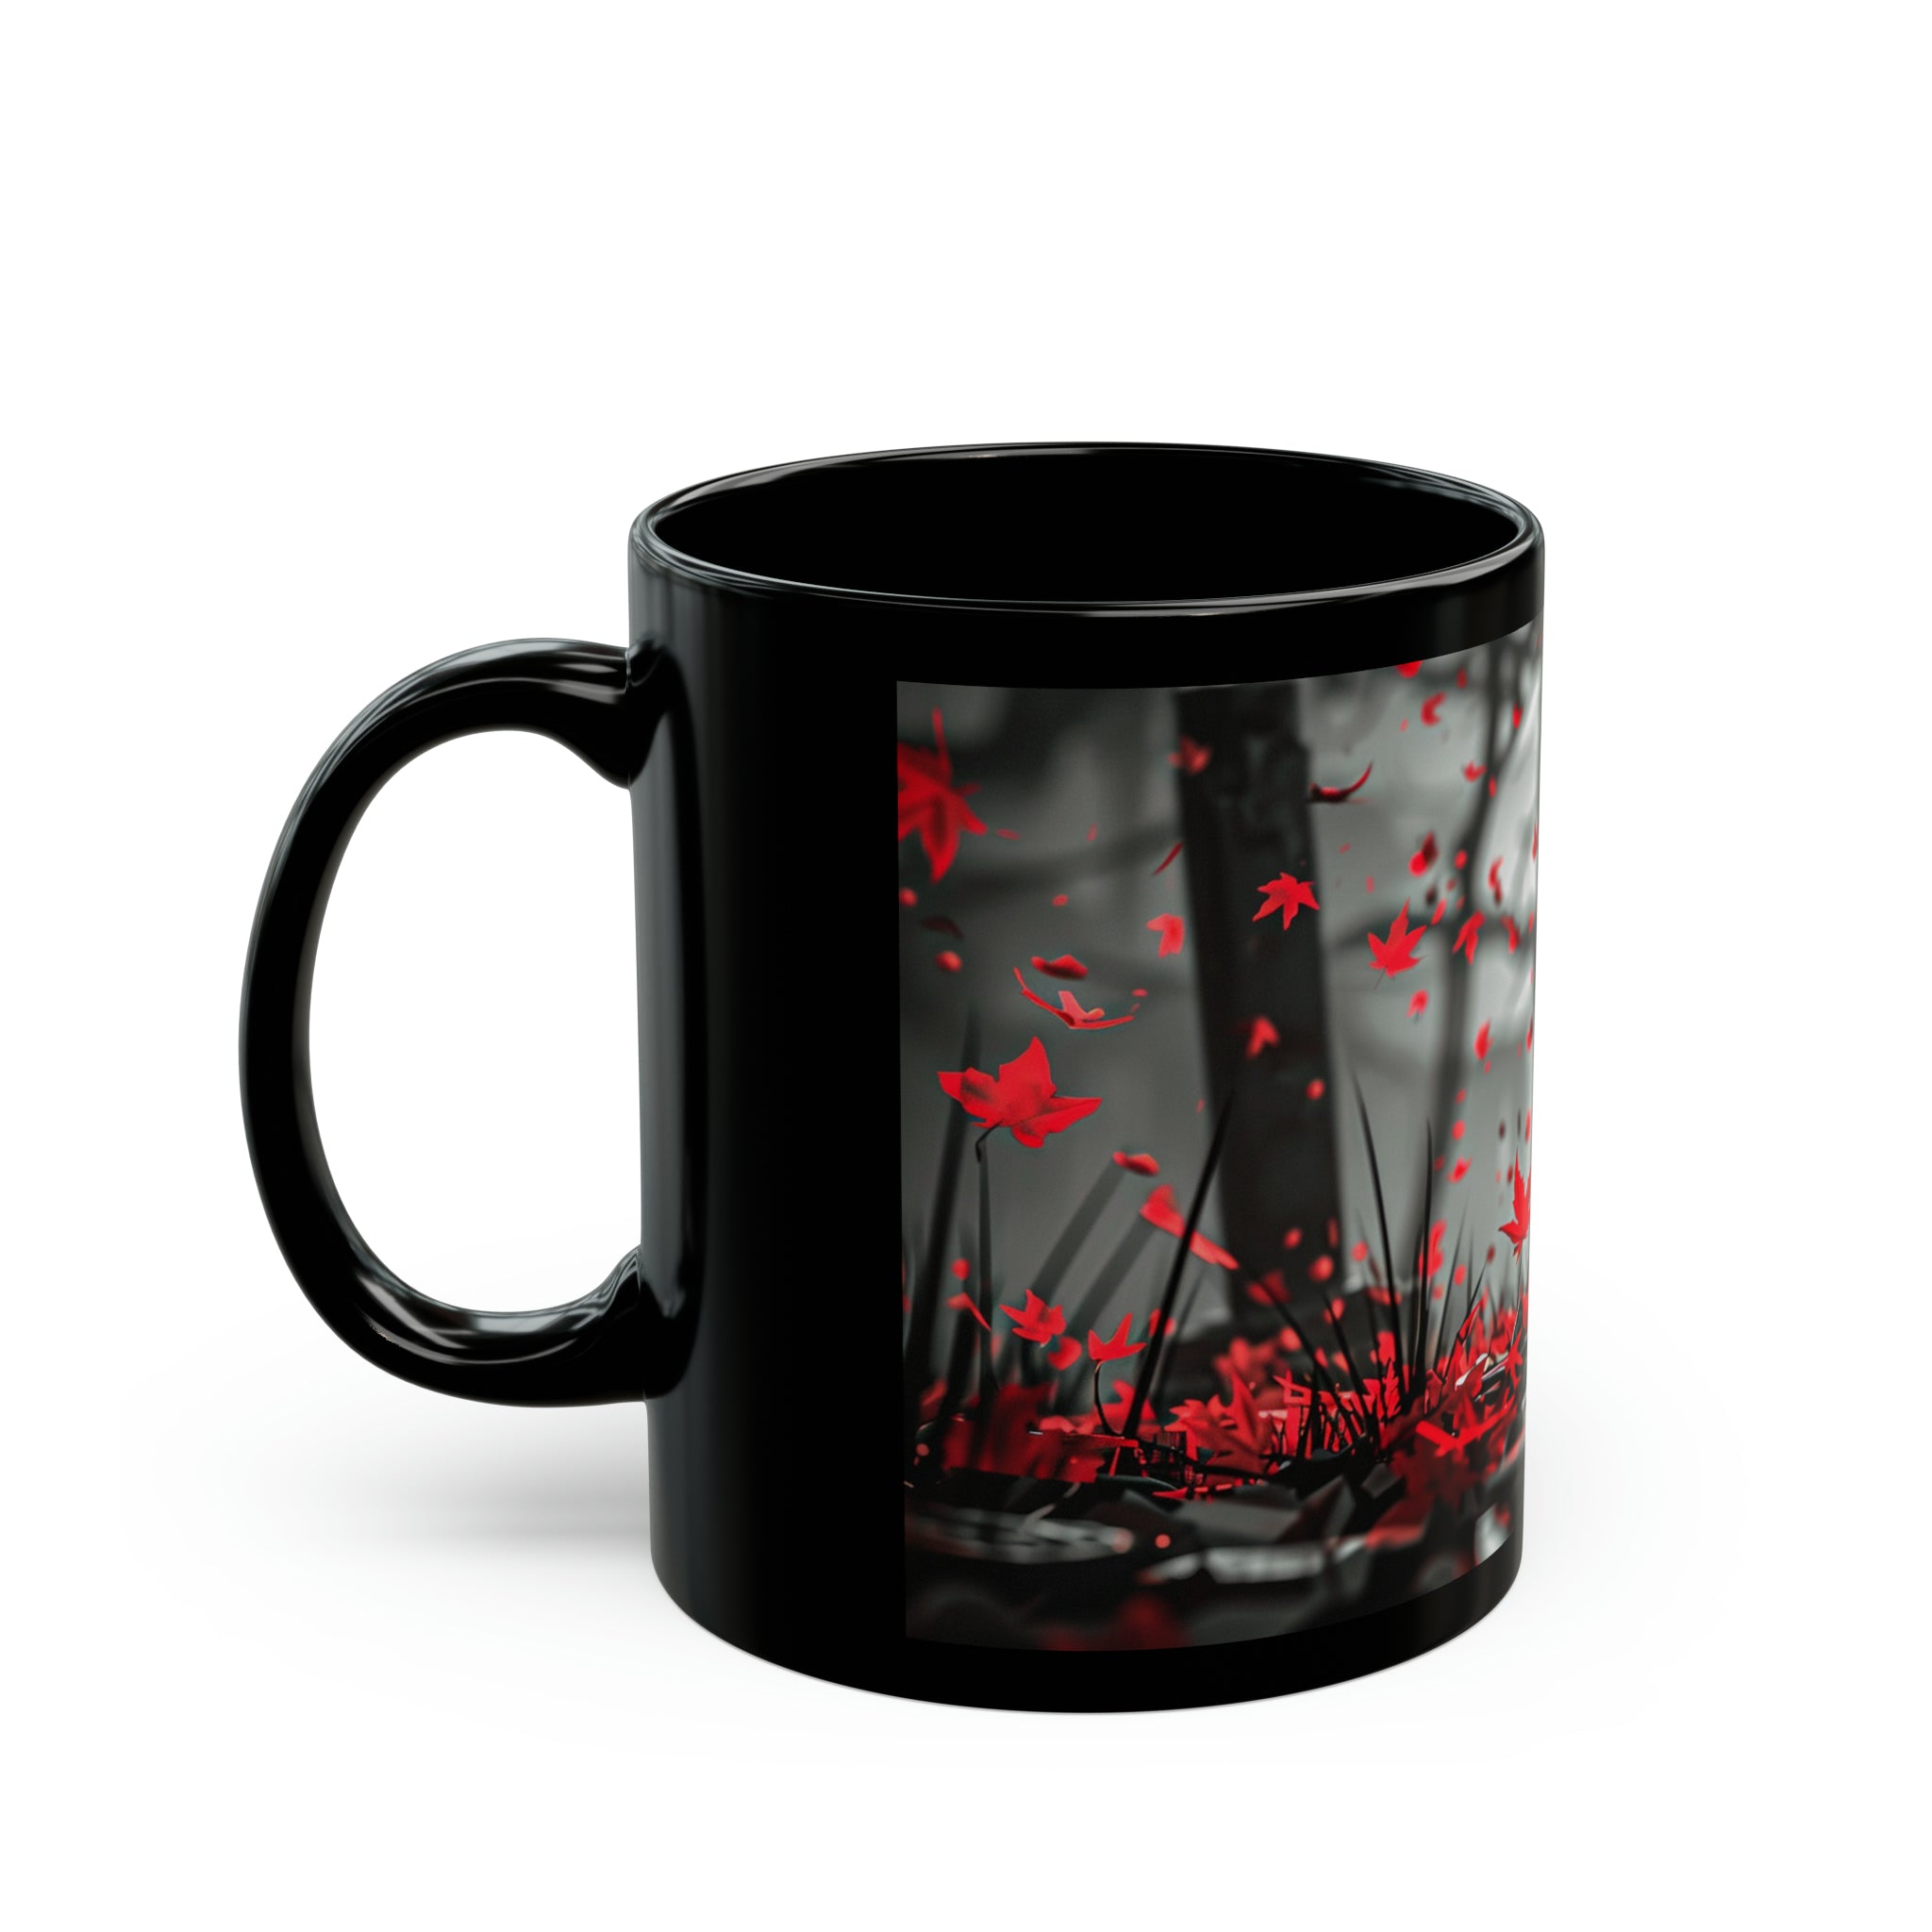 "Eternal Companion: Canine Guardian Angel Black Mug - Solemn Loyalty in Every Sip" (Available in 11oz & 15oz)